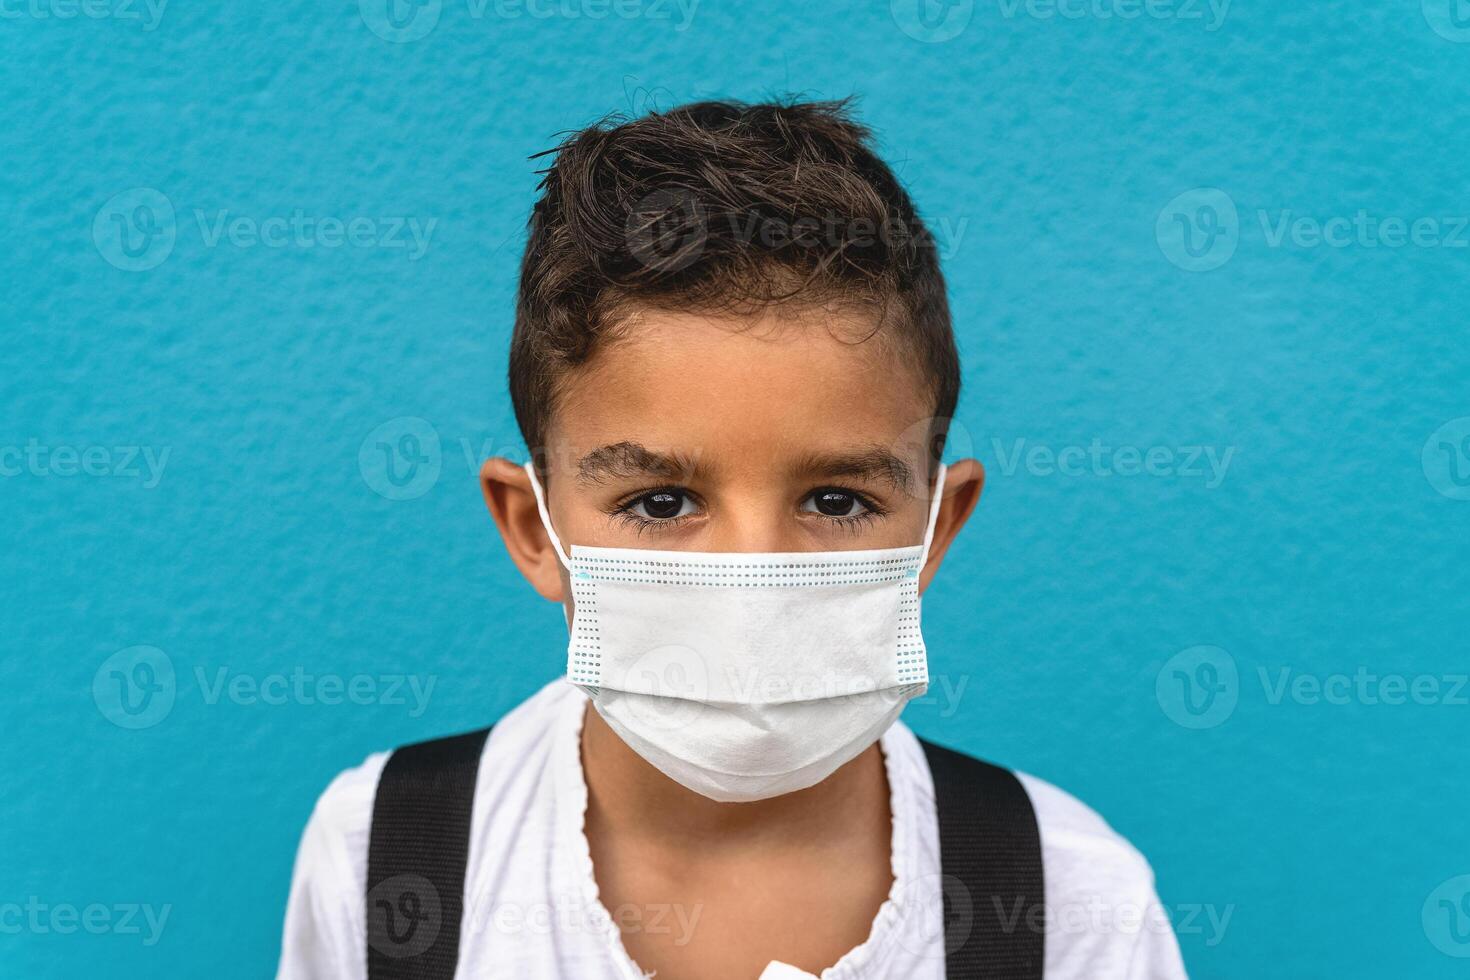 Child wearing face protective mask going back to school during corona virus pandemic photo